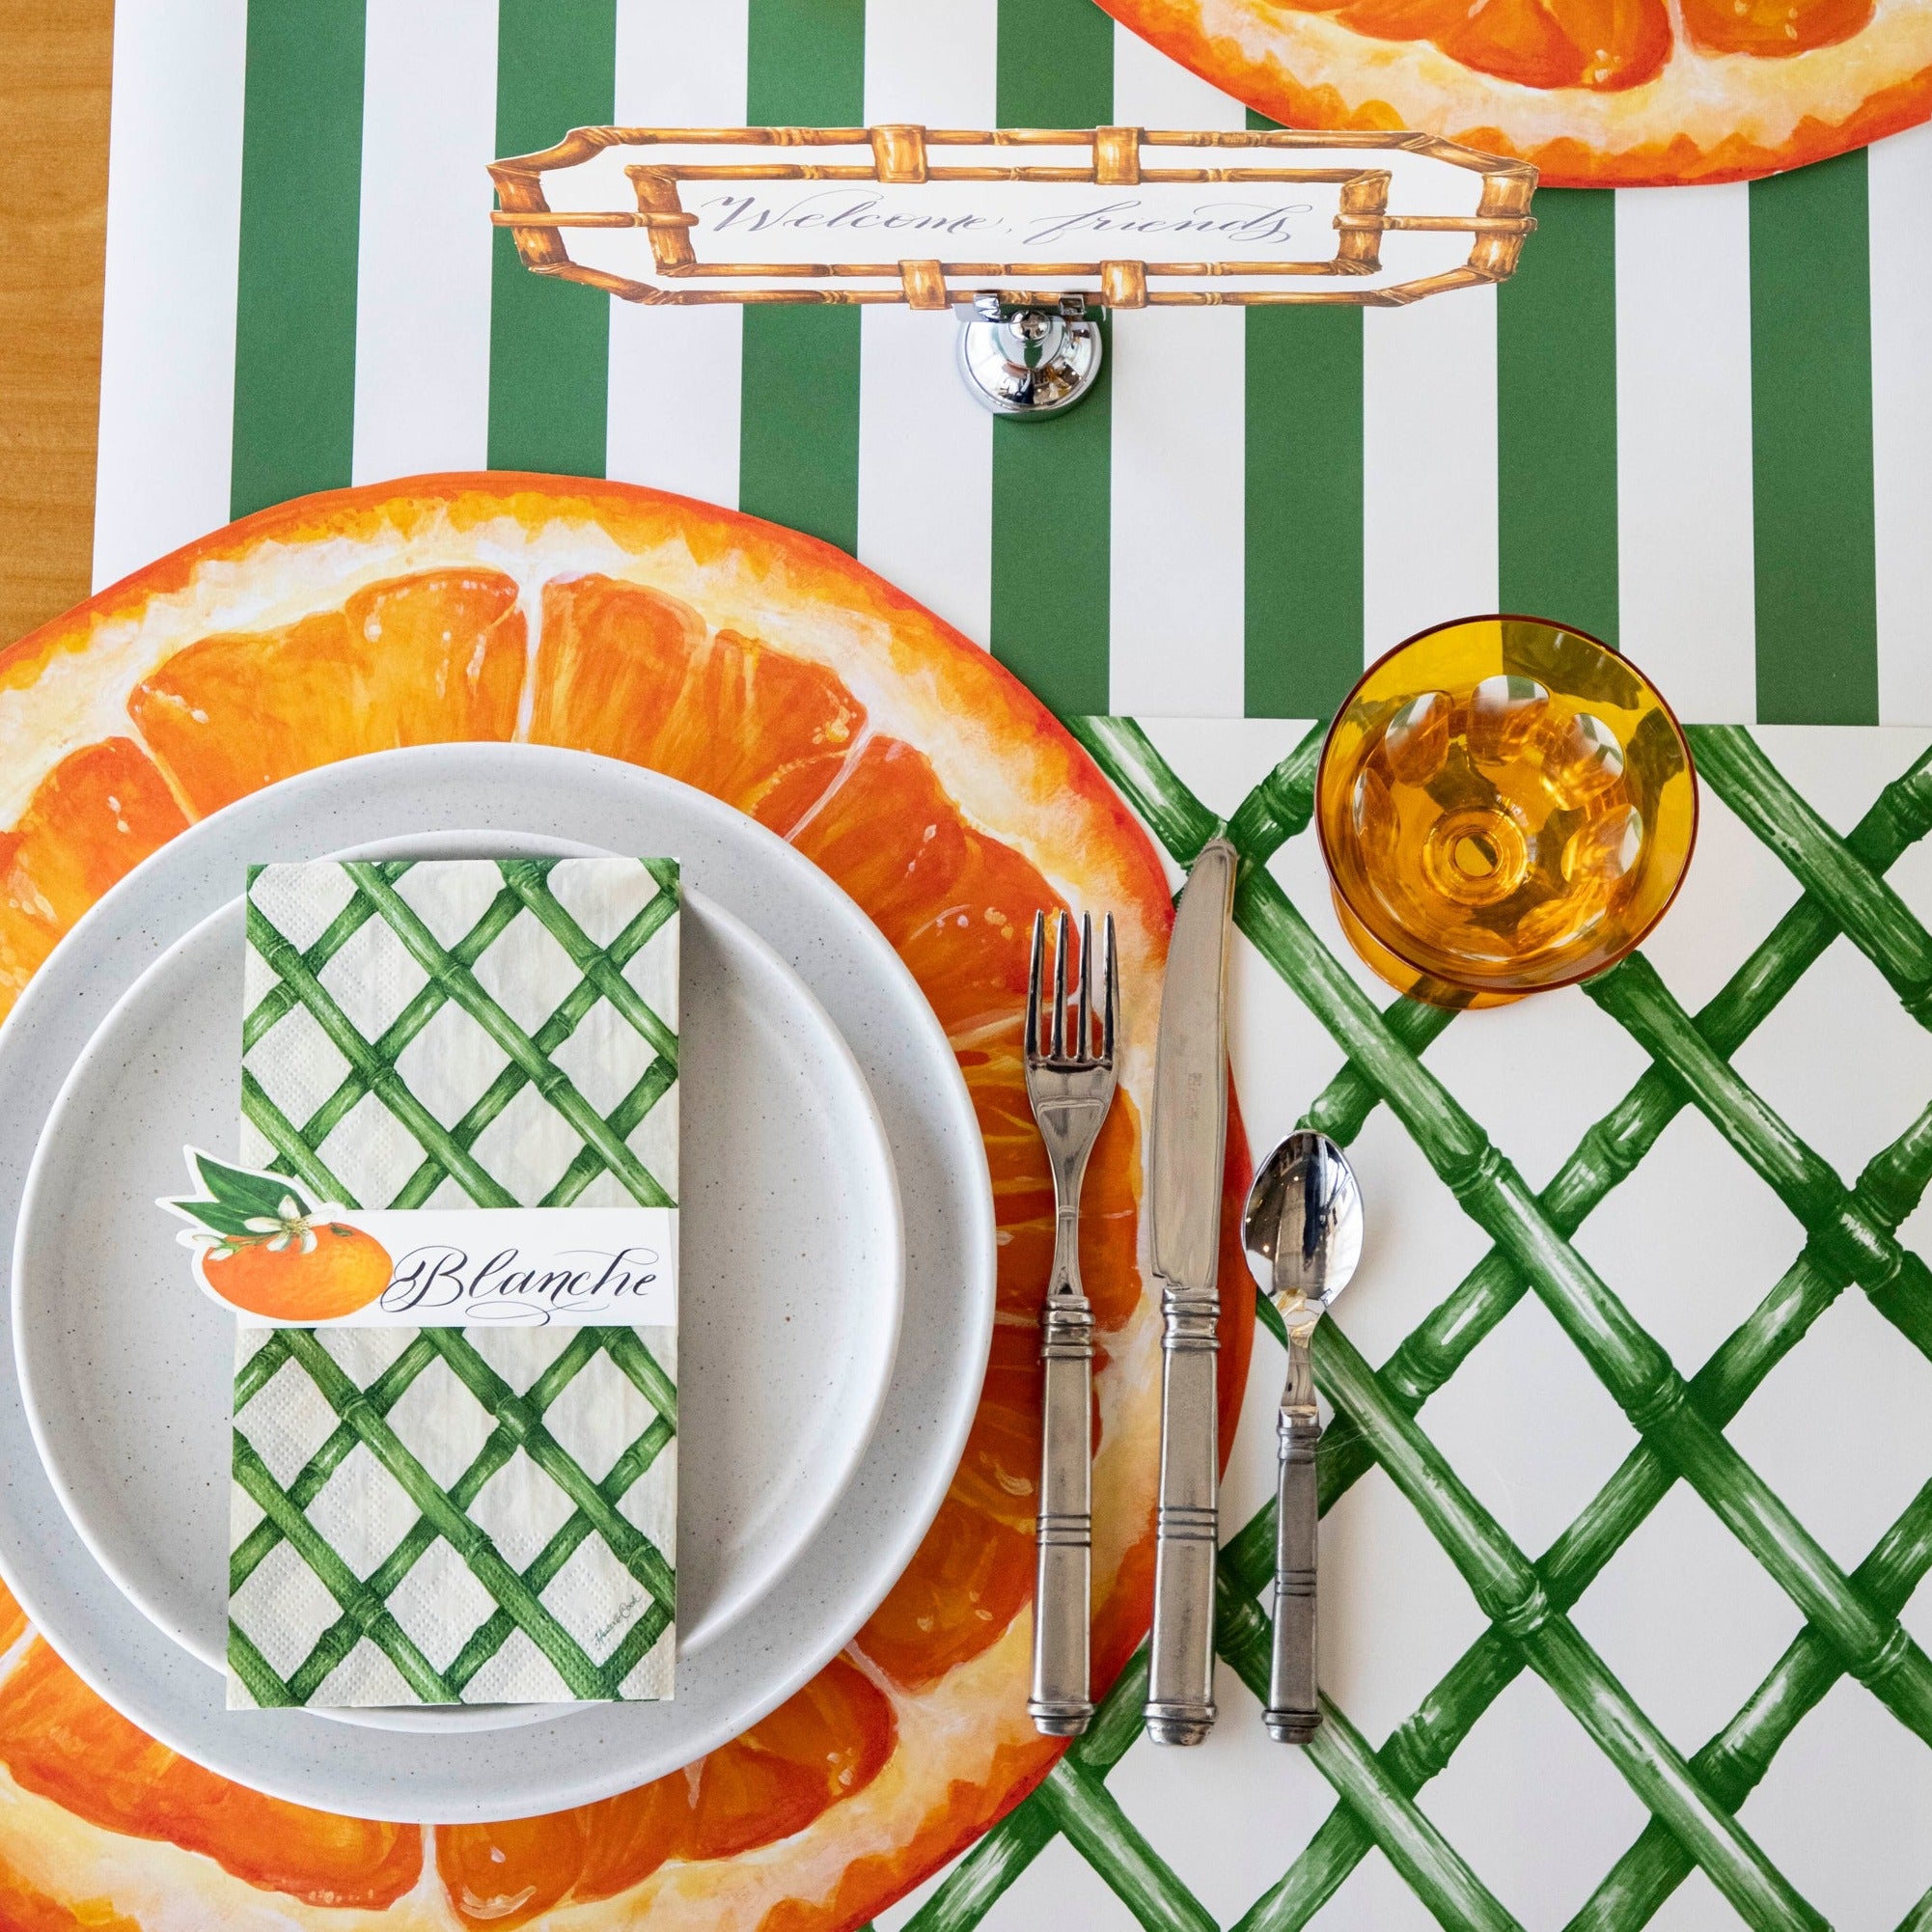 The Die-cut Orange Slice Placemat under an elegant place setting from above.